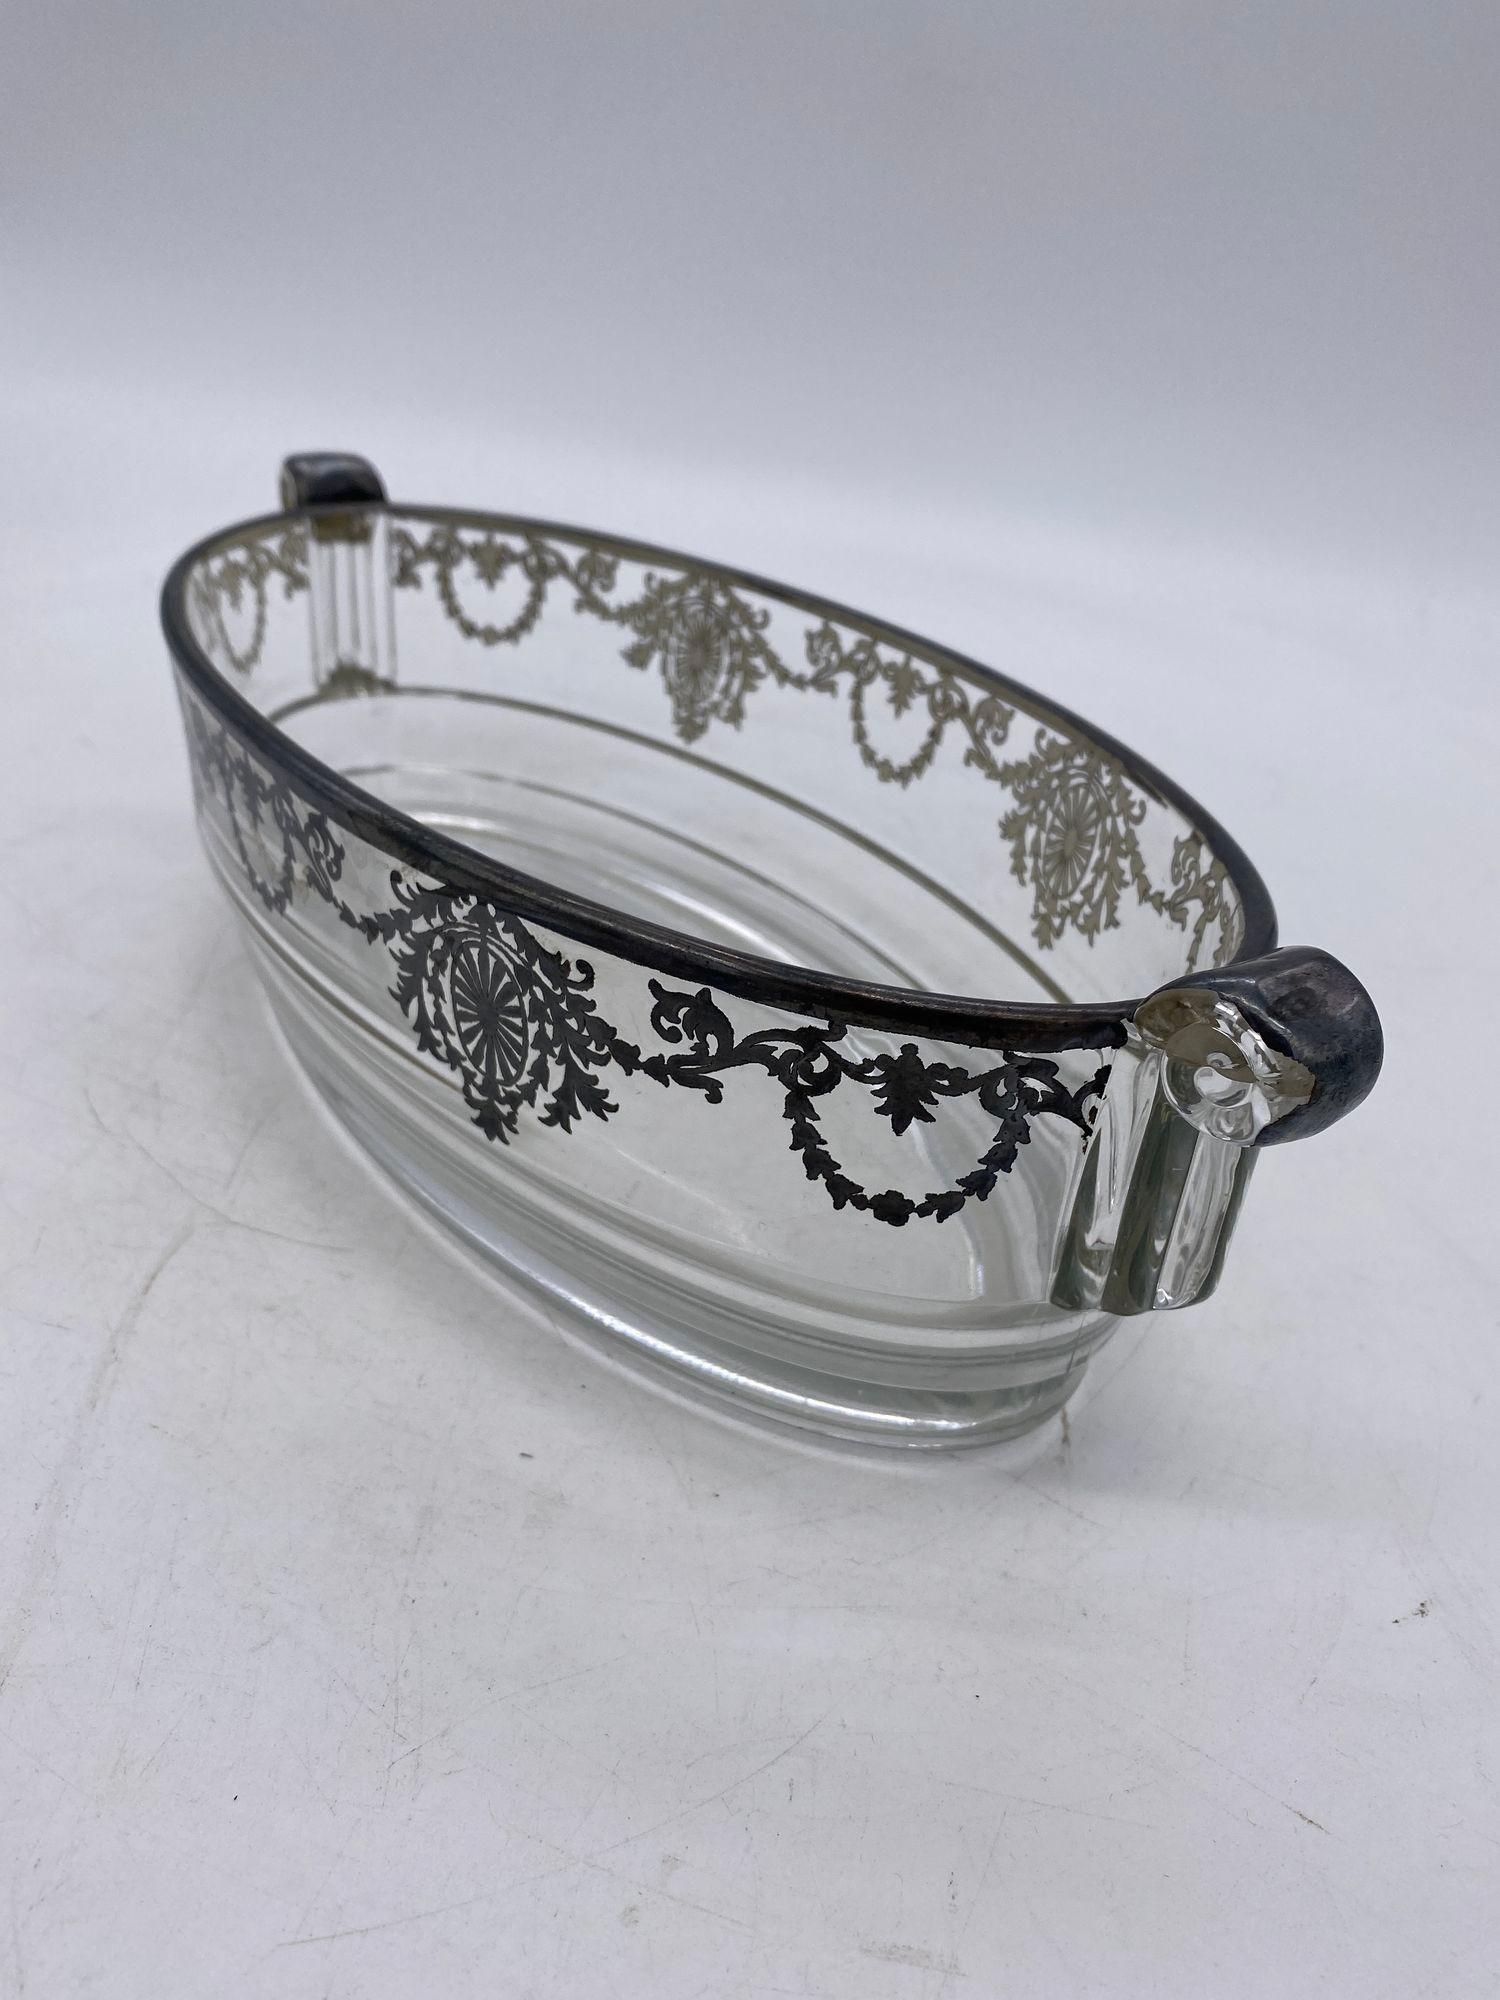 High Style glass serving bowl with sterling silver Overlay/Inlay and scrolling handles and Art Deco shape.

Circa 1920